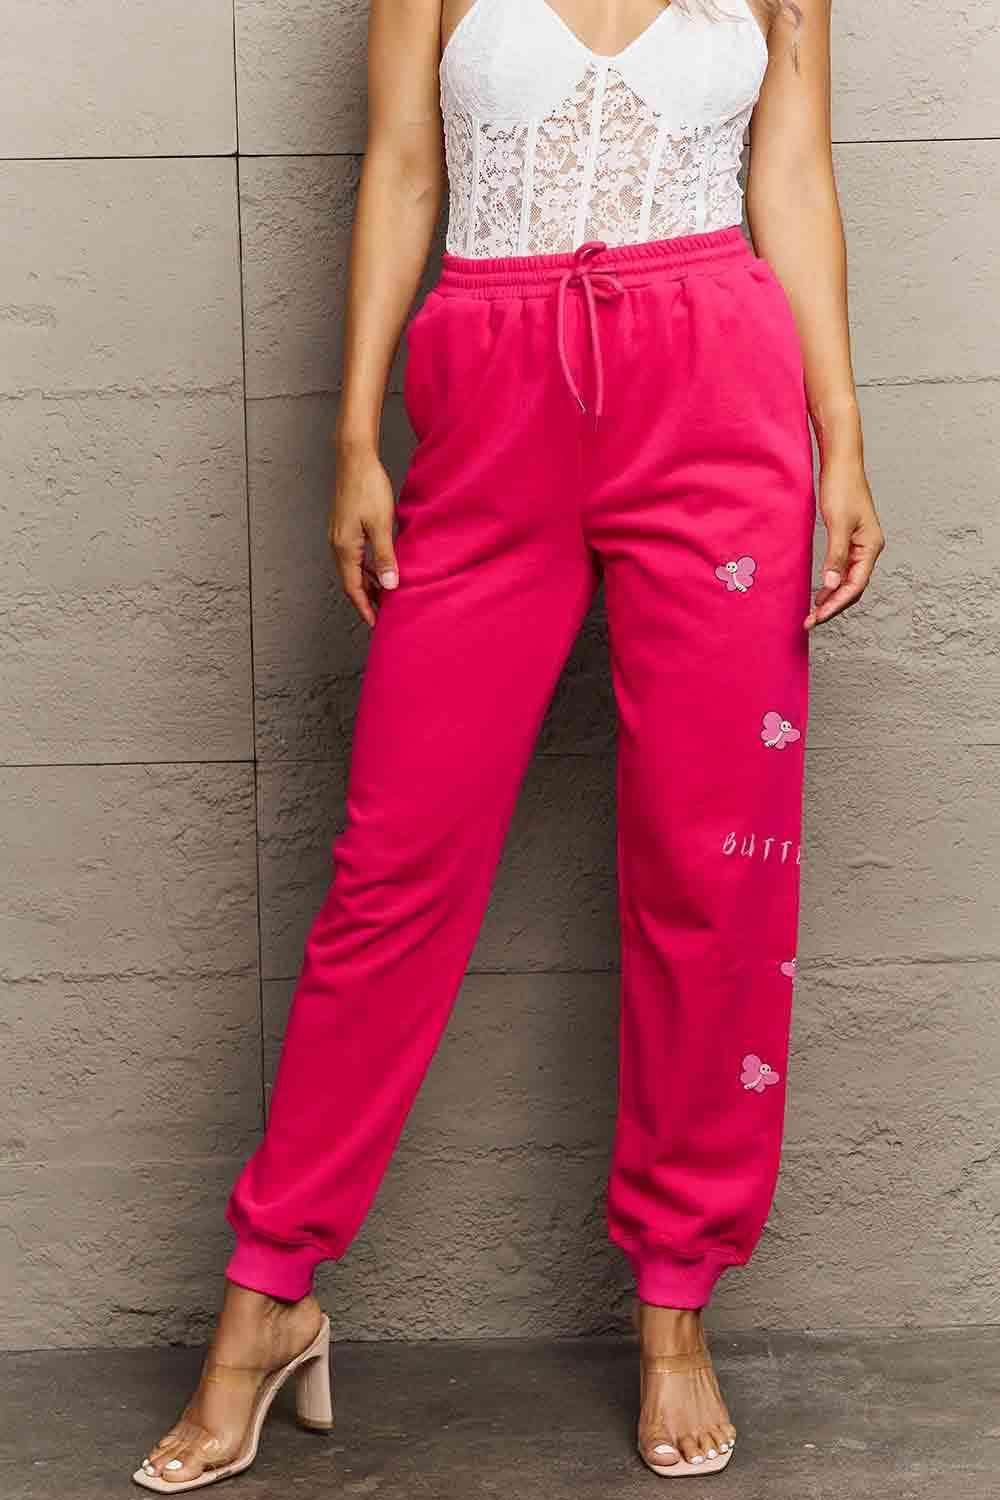 Simply Love Simply Love Full Size Drawstring BUTTERFLY Graphic Long Sweatpants - Immenzive